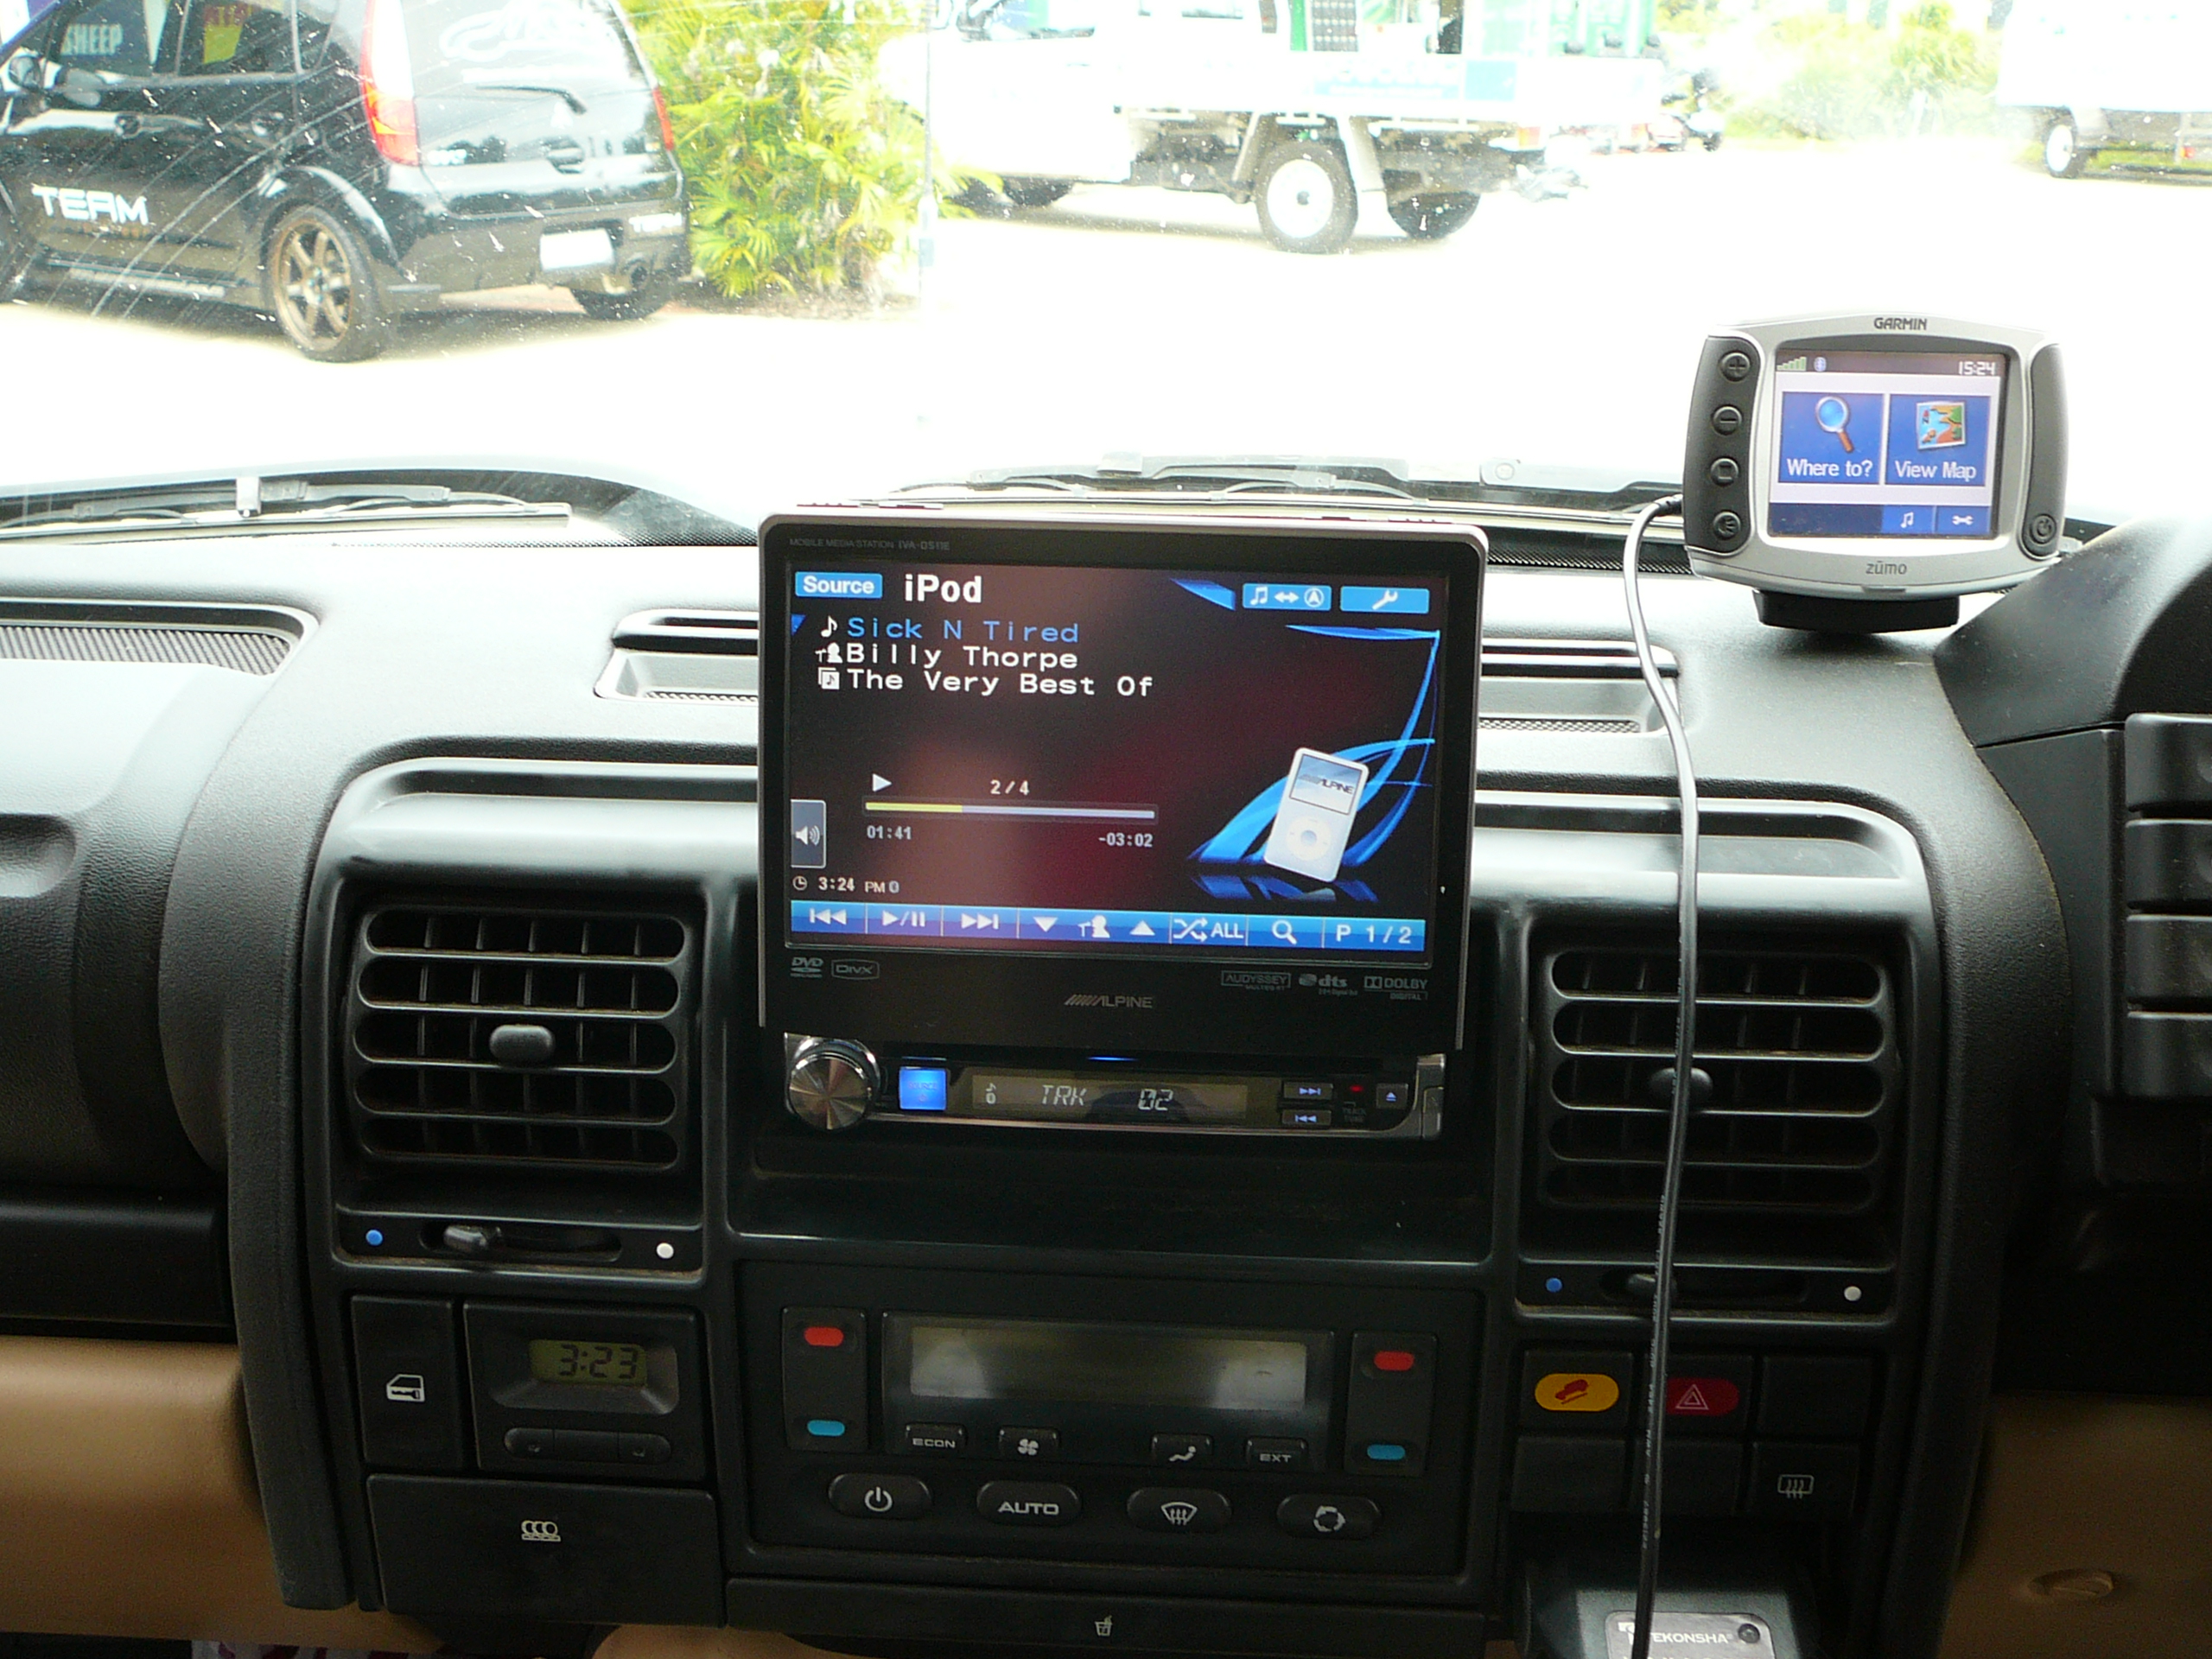 Landrover Discovery 2 DVD Head unit